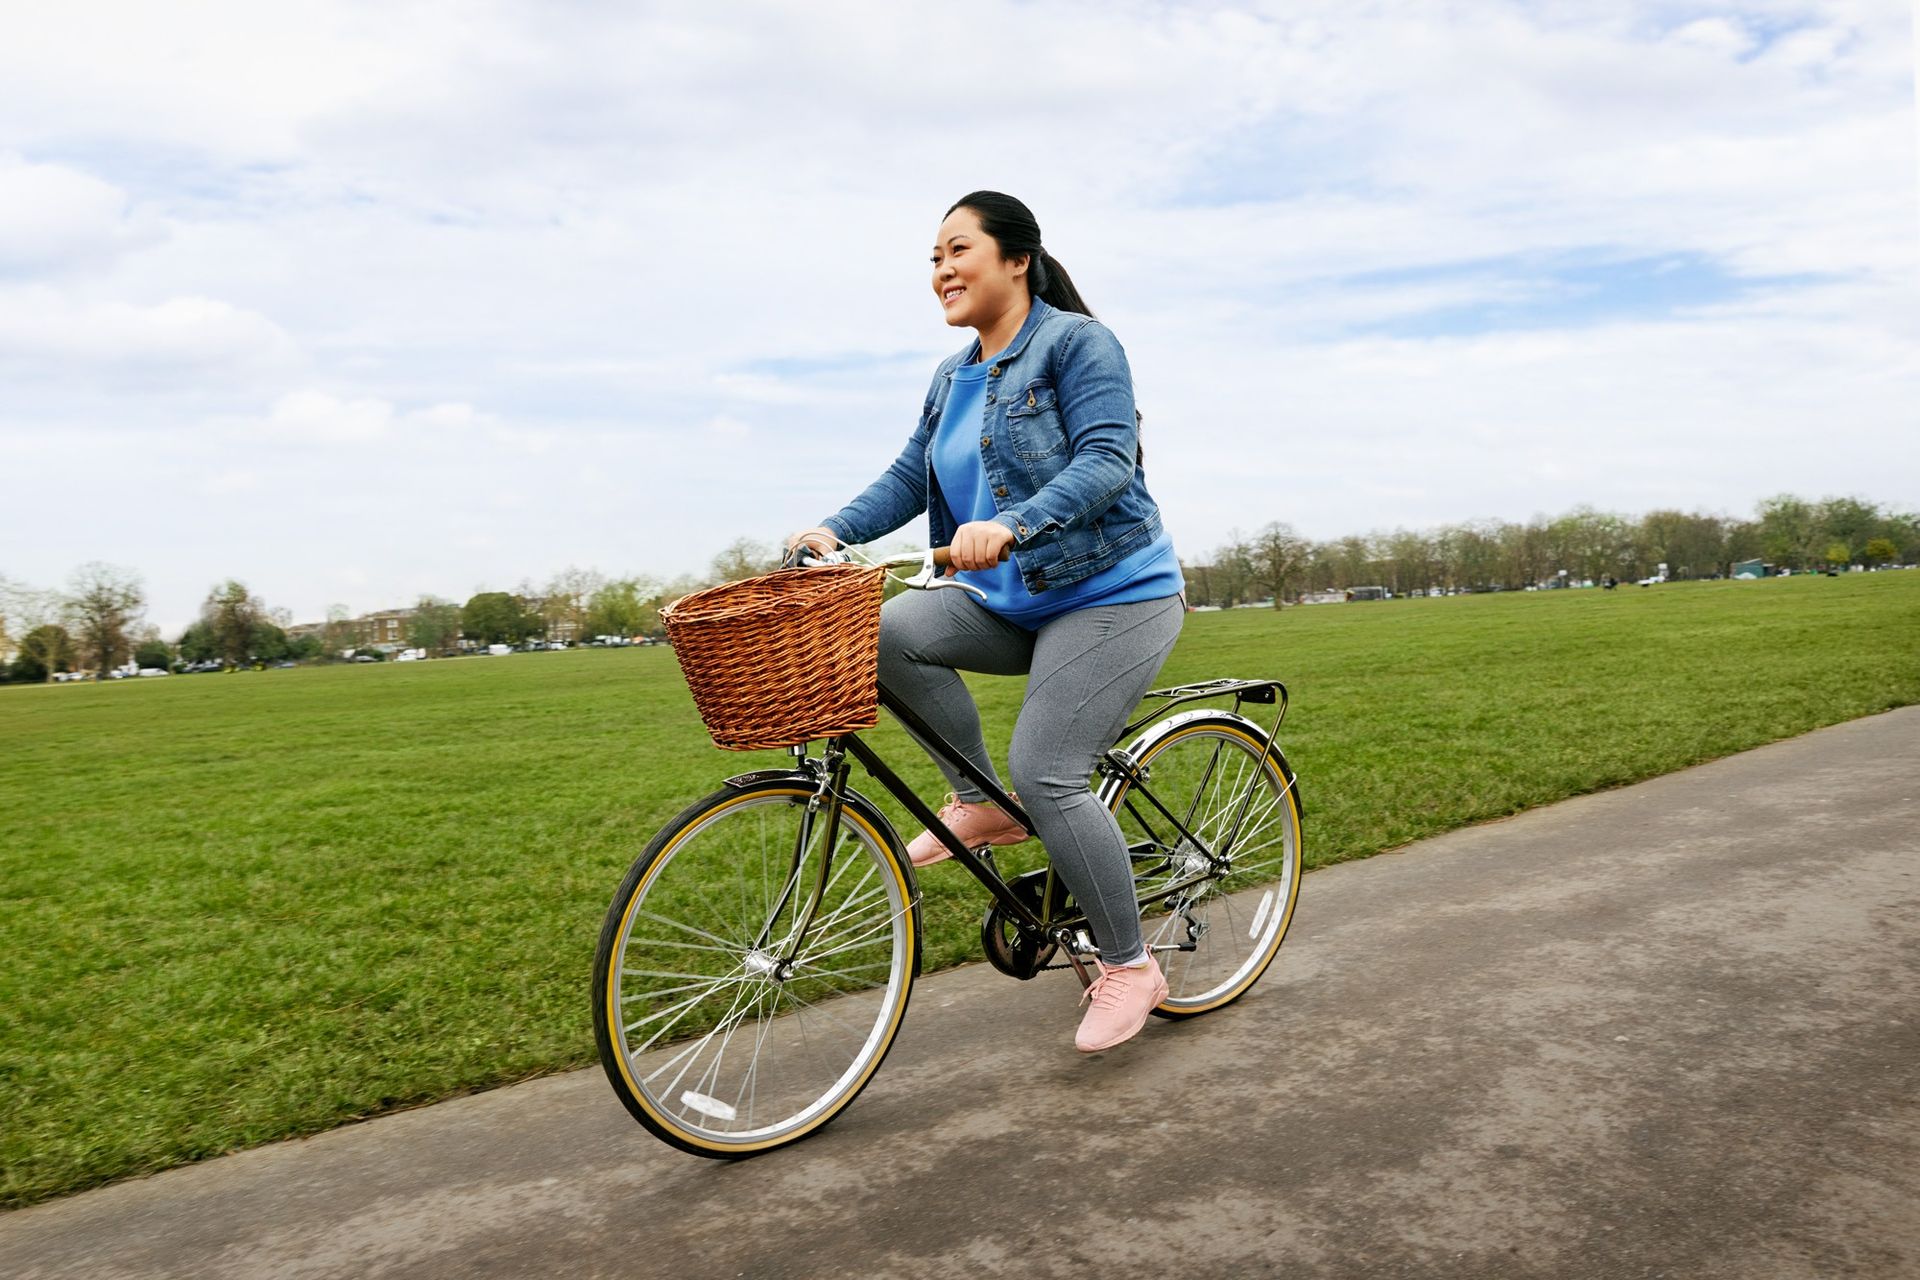 A woman is riding a bike on a path in a park.